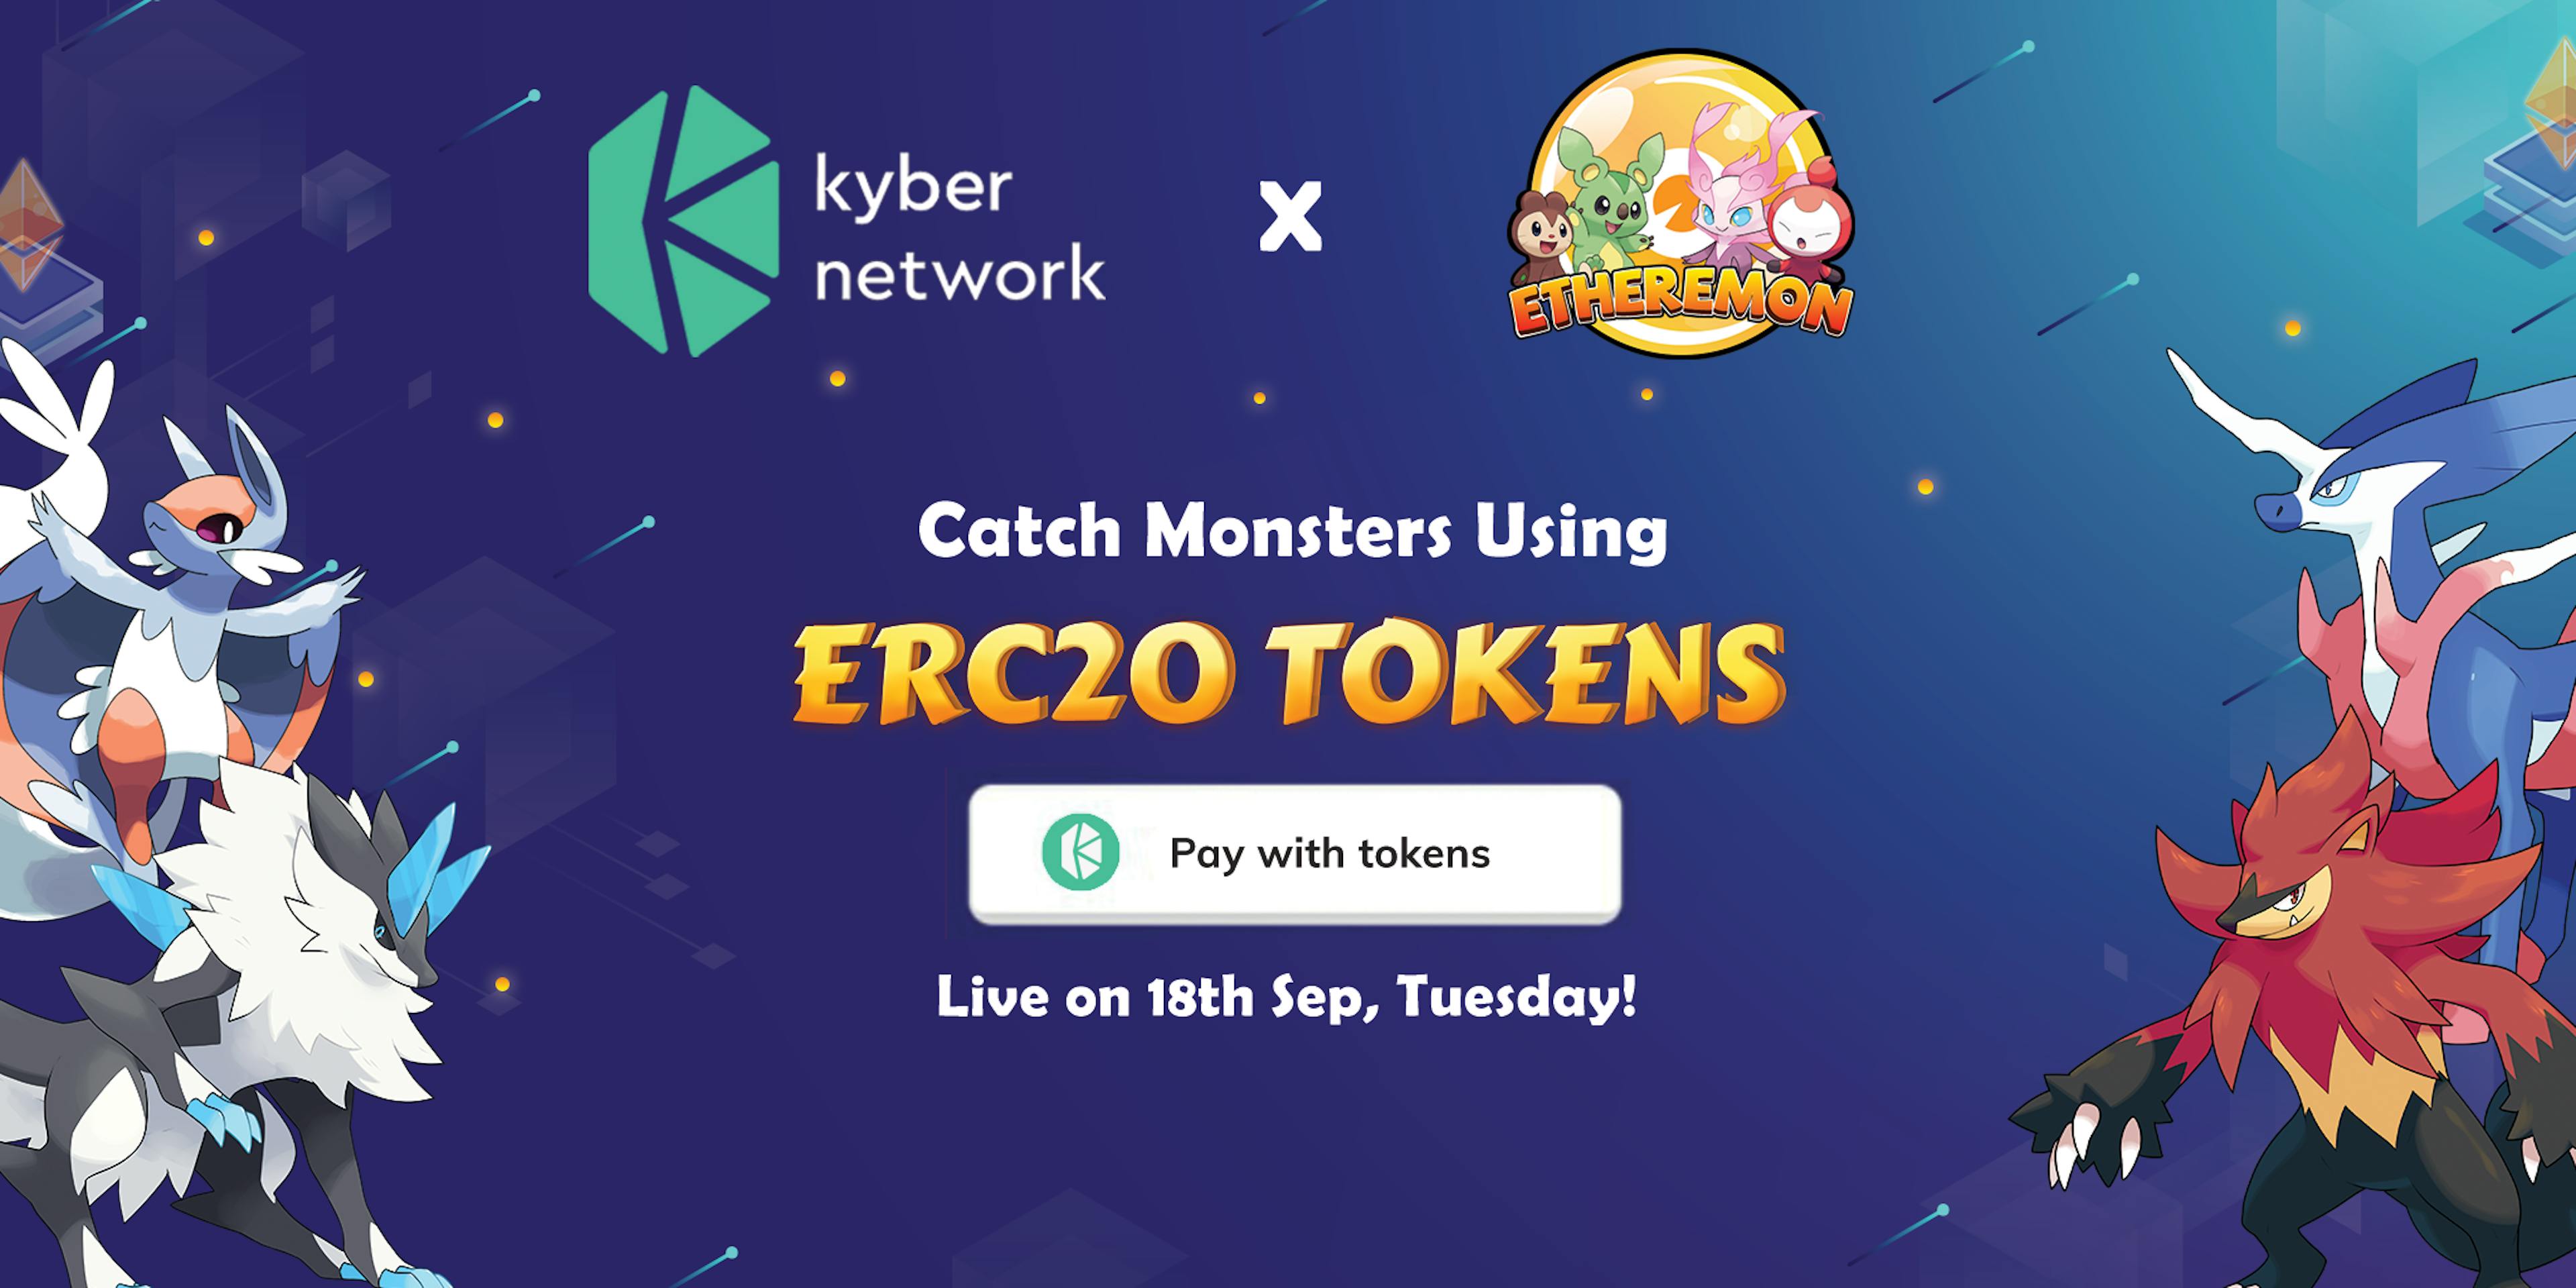 featured image - Etheremon partners with Kyber to solve payment problem for decentralized apps